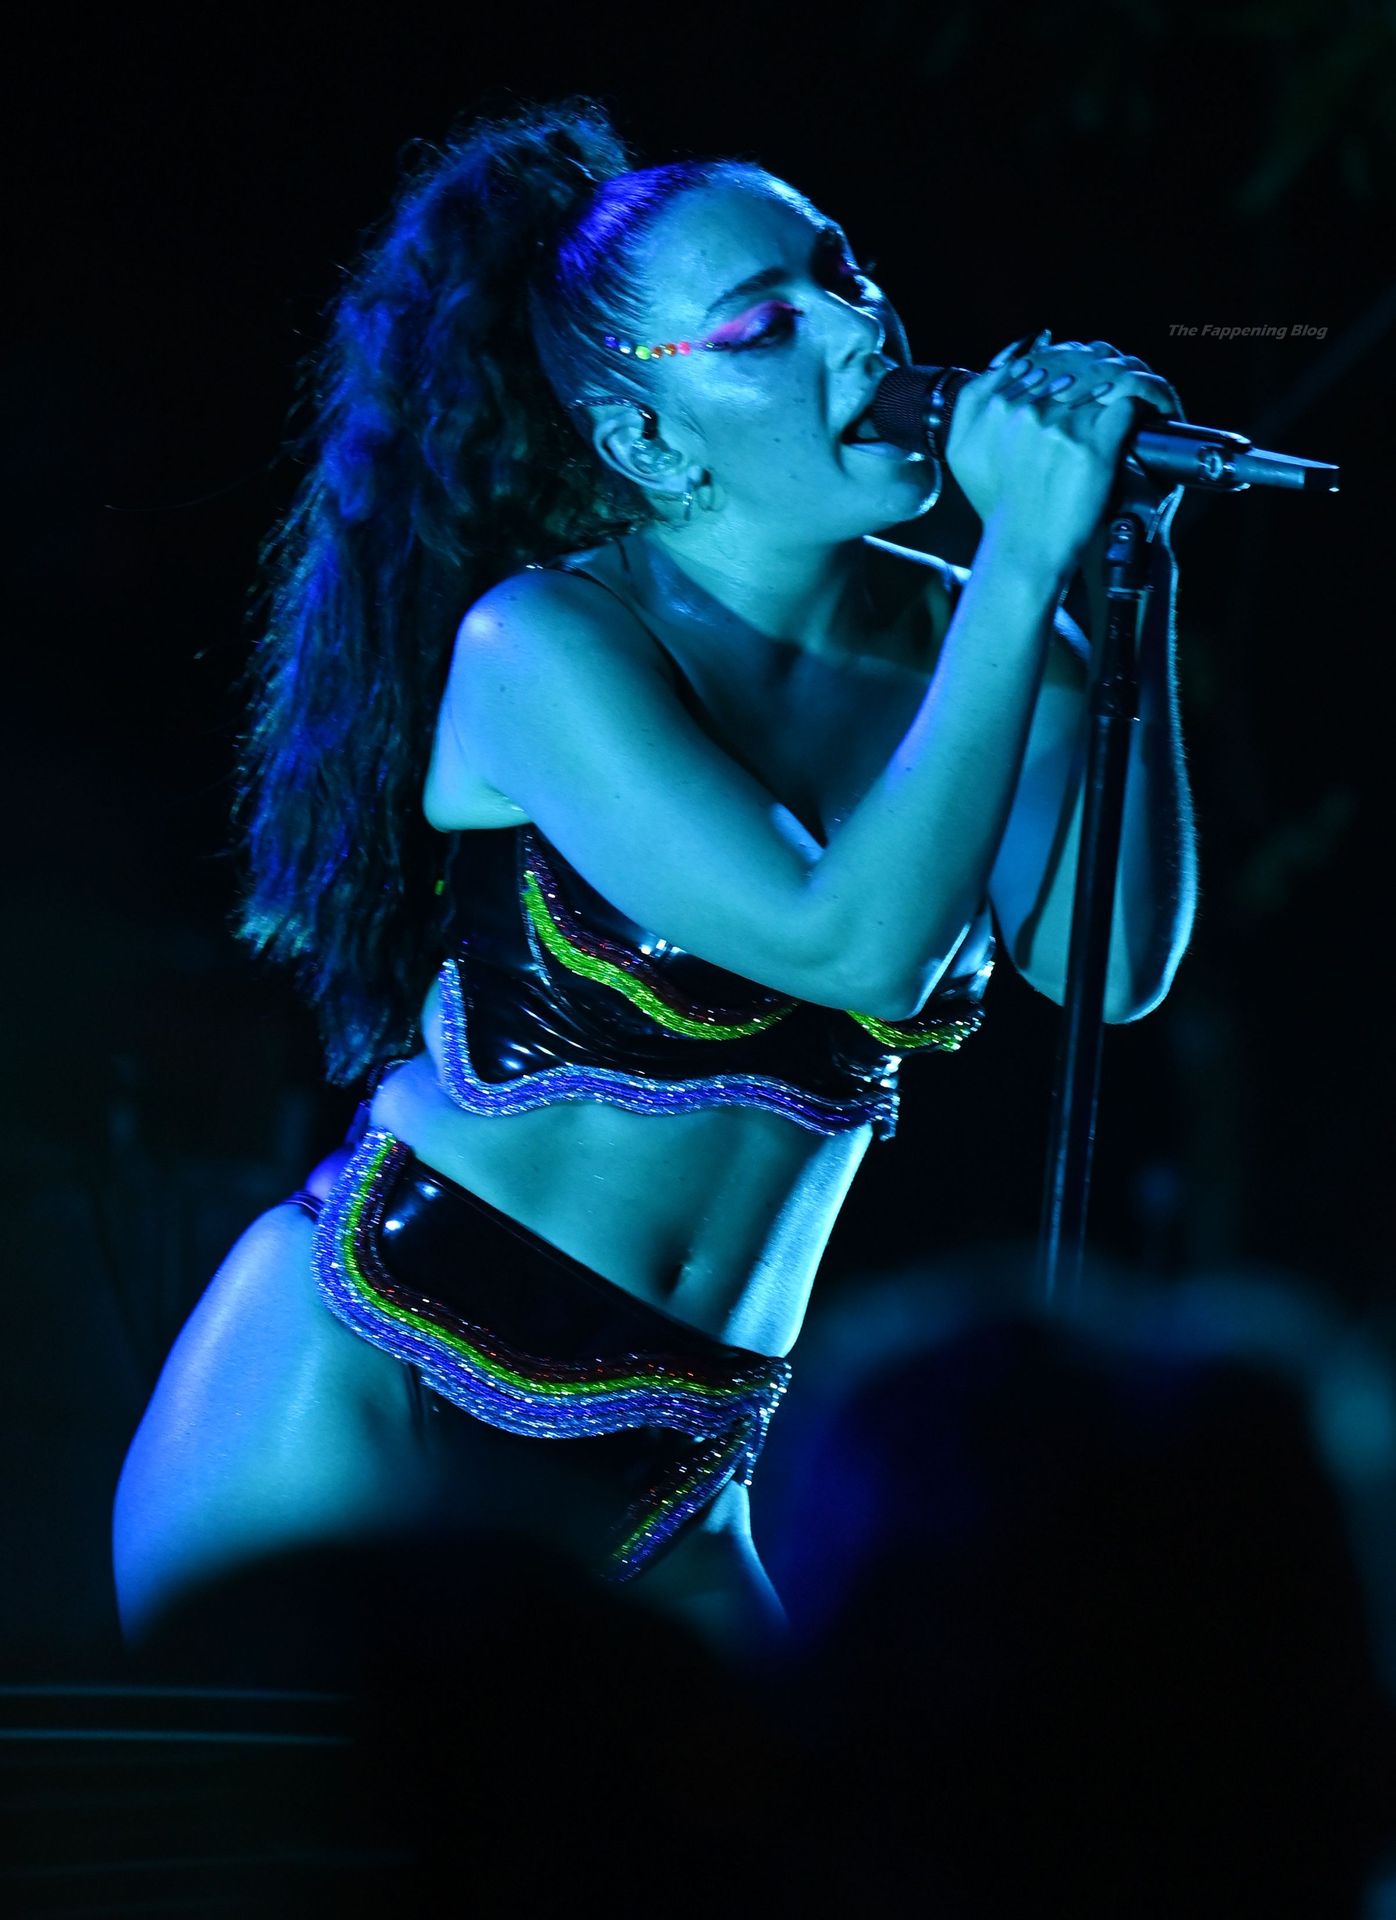 Charli-XCX-Sexy-The-Fappening-Blog-32.jpg